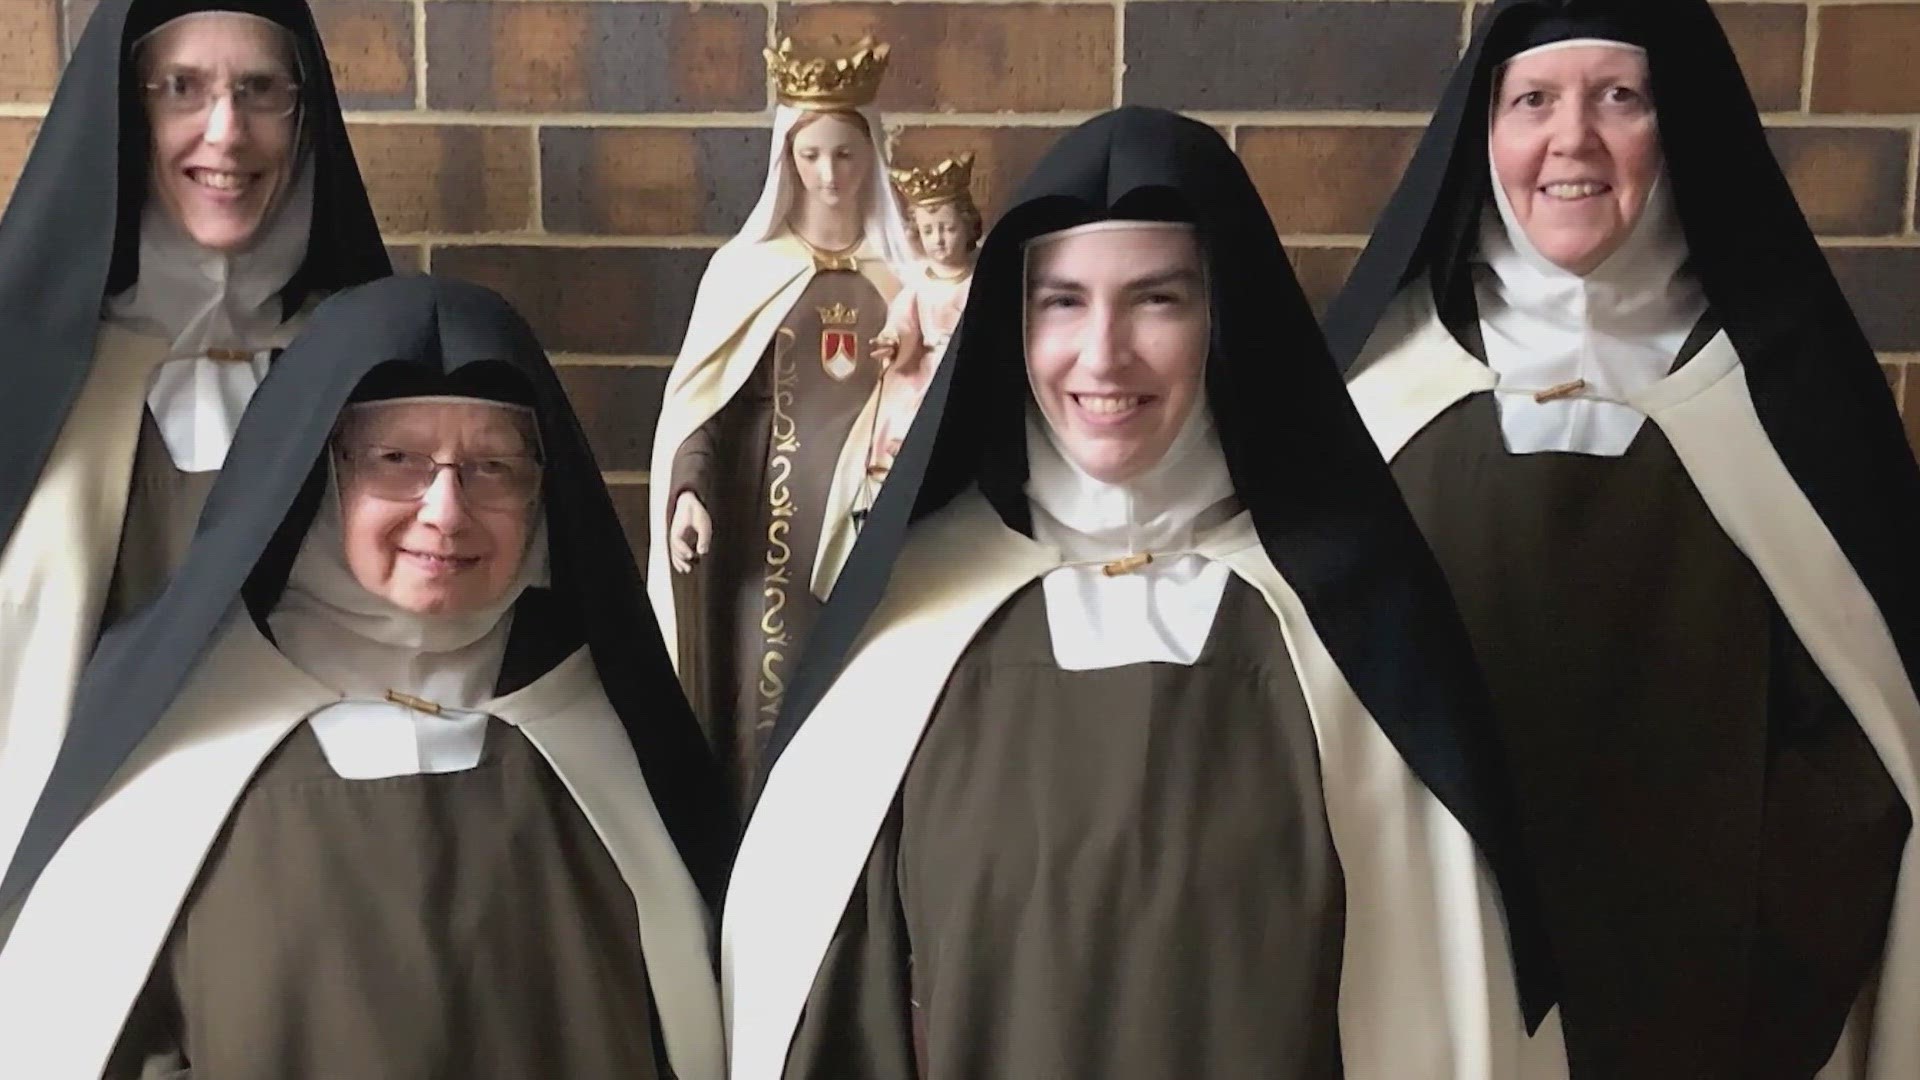 "No one who abuses us as has the current Bishop of Fort Worth, has any right to our cooperation or obedience," a statement from the Discalced Carmelite Nuns reads.